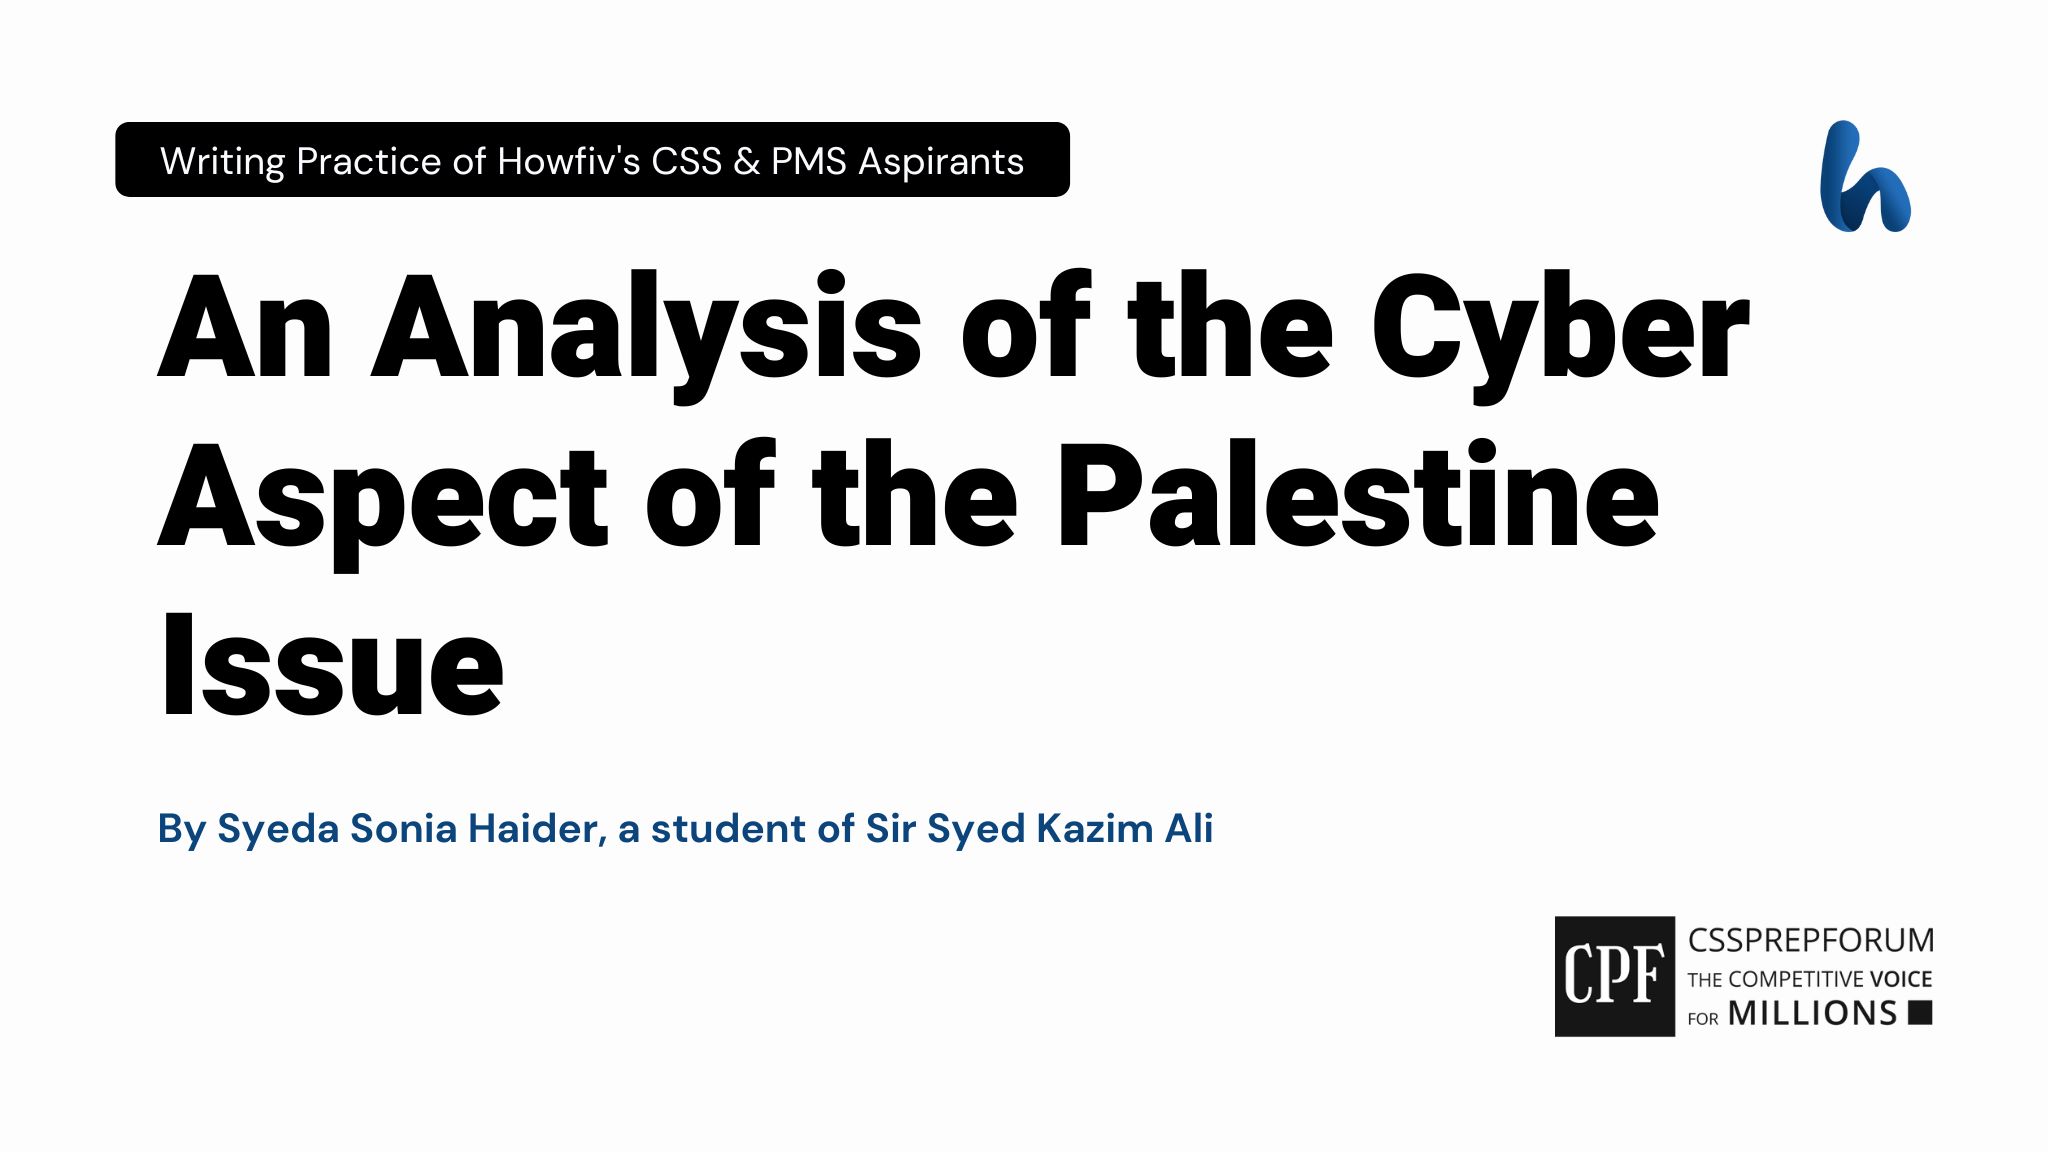 An Analysis of the Cyber Aspect of the Palestine Issue by Syeda Sonia Haider